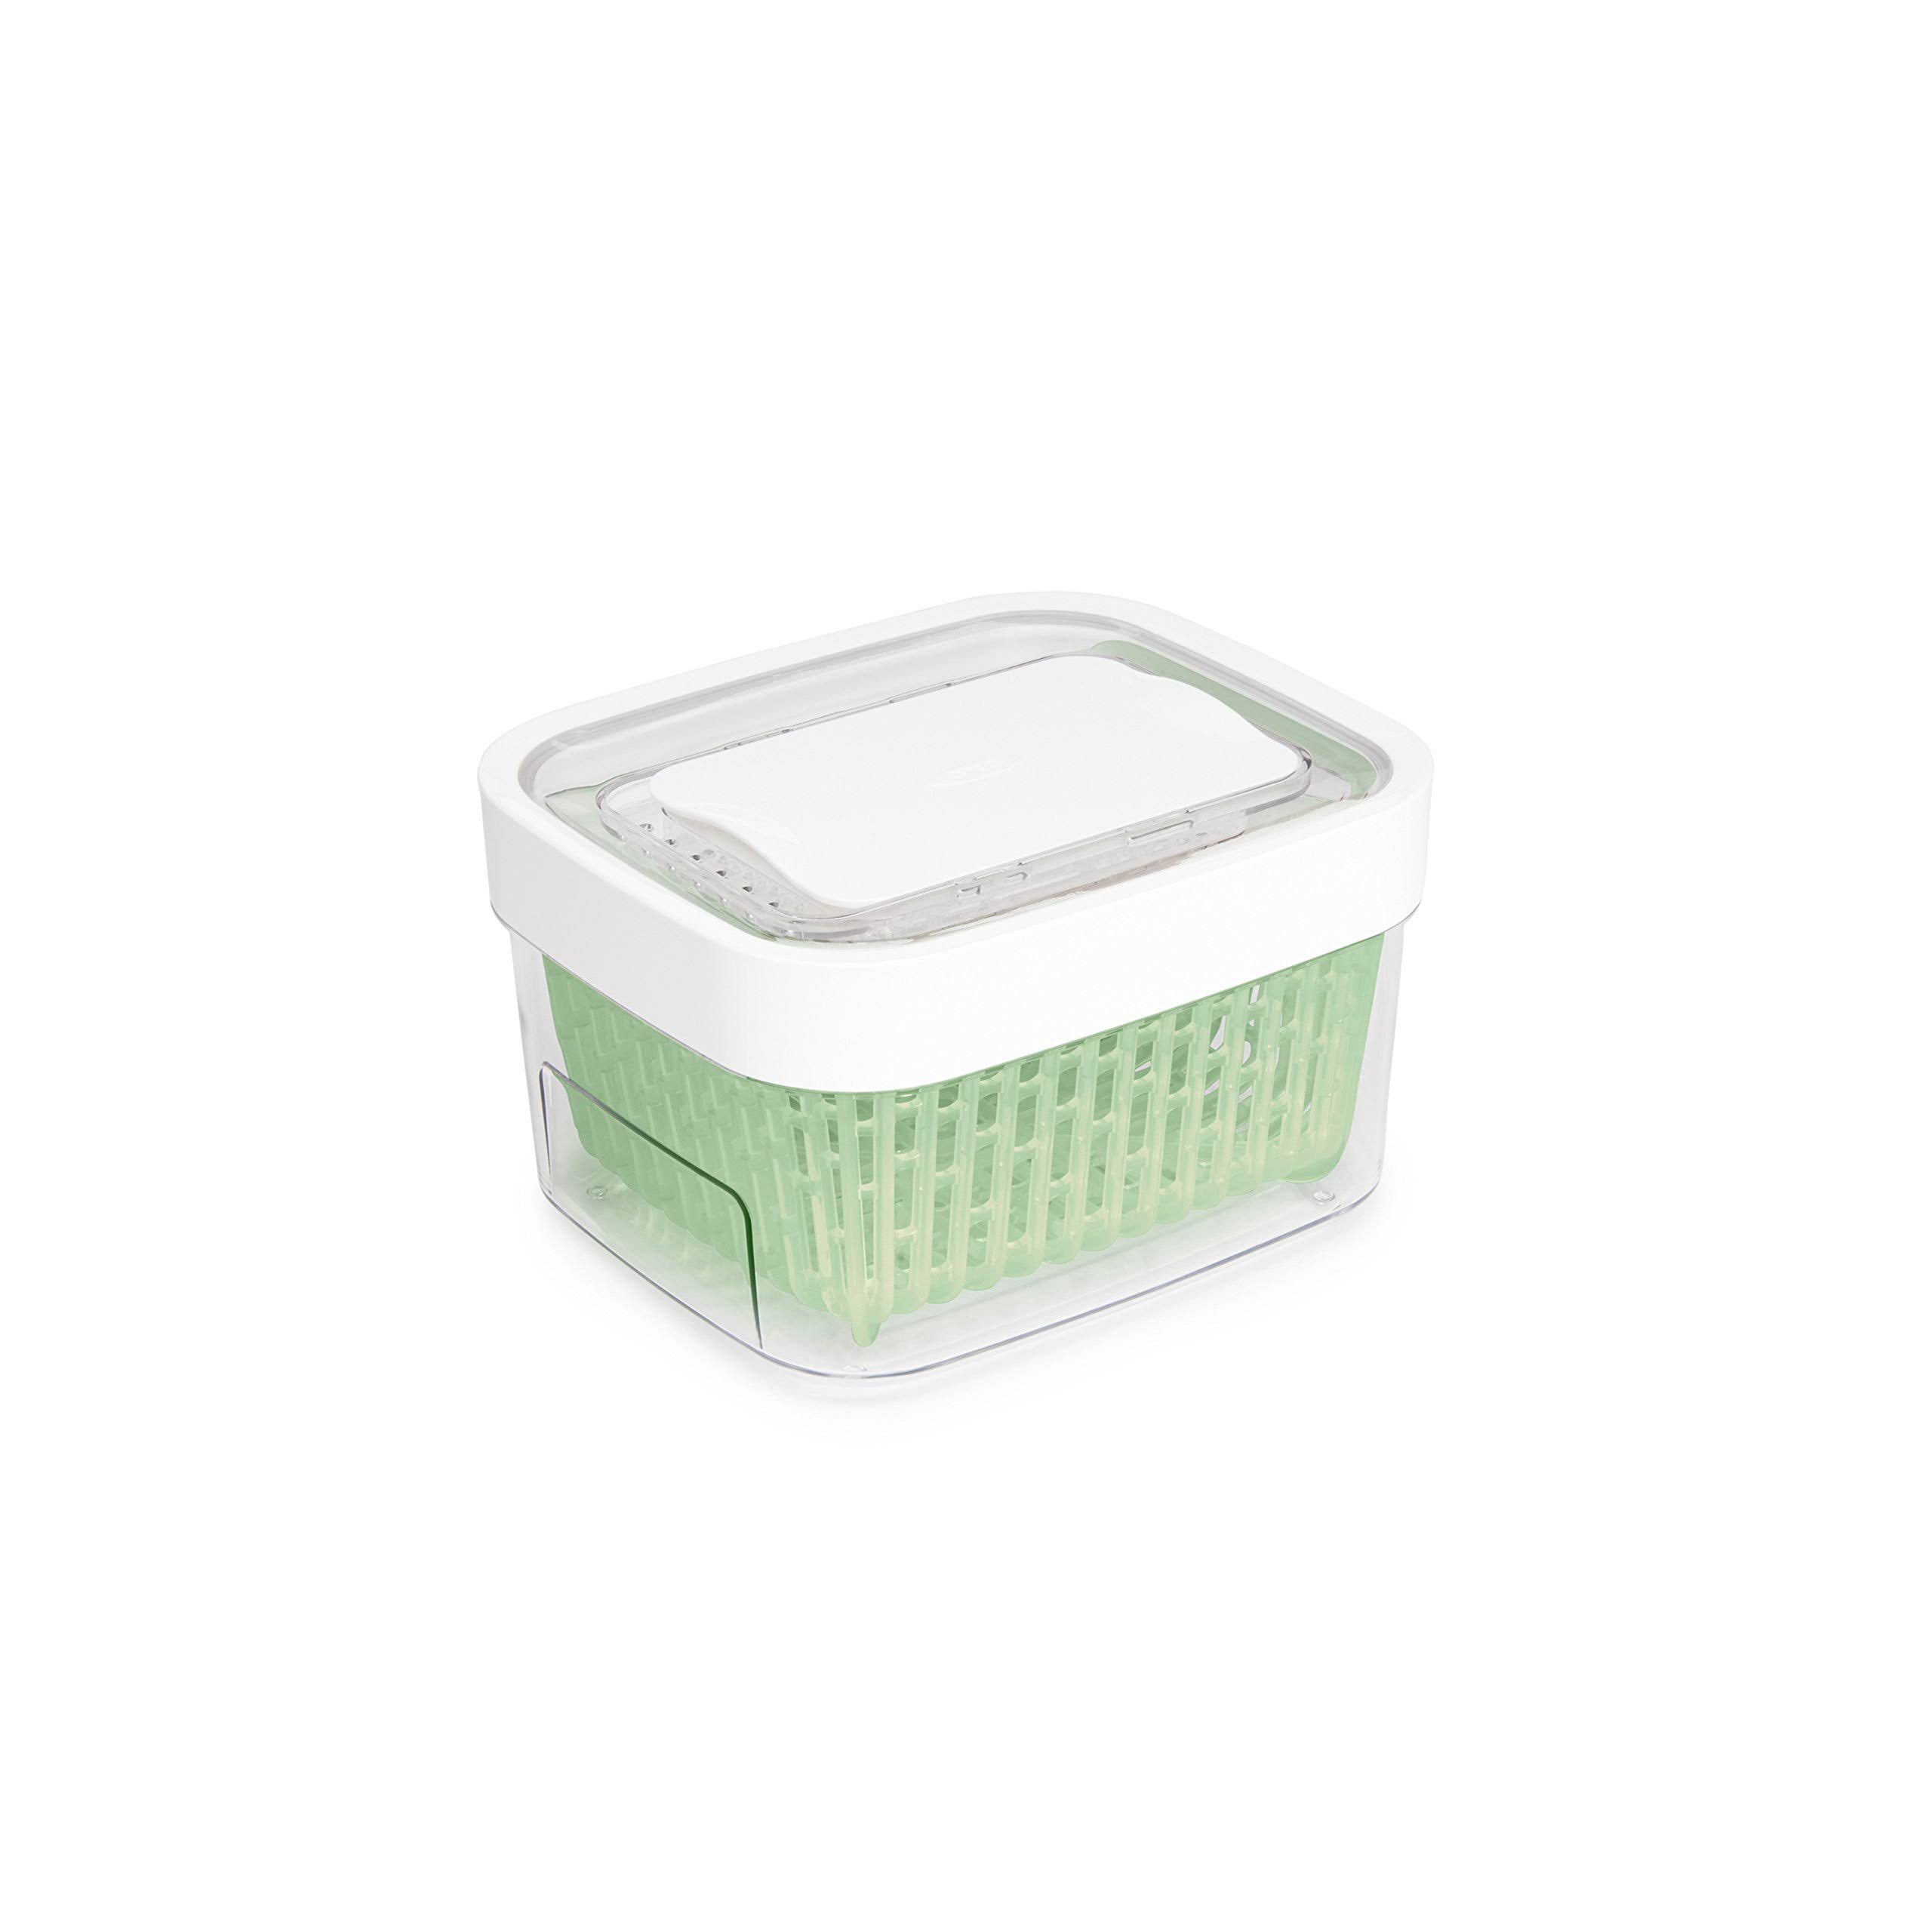 OXO Good Grips Green Saver Produce Keeper - 1.5l